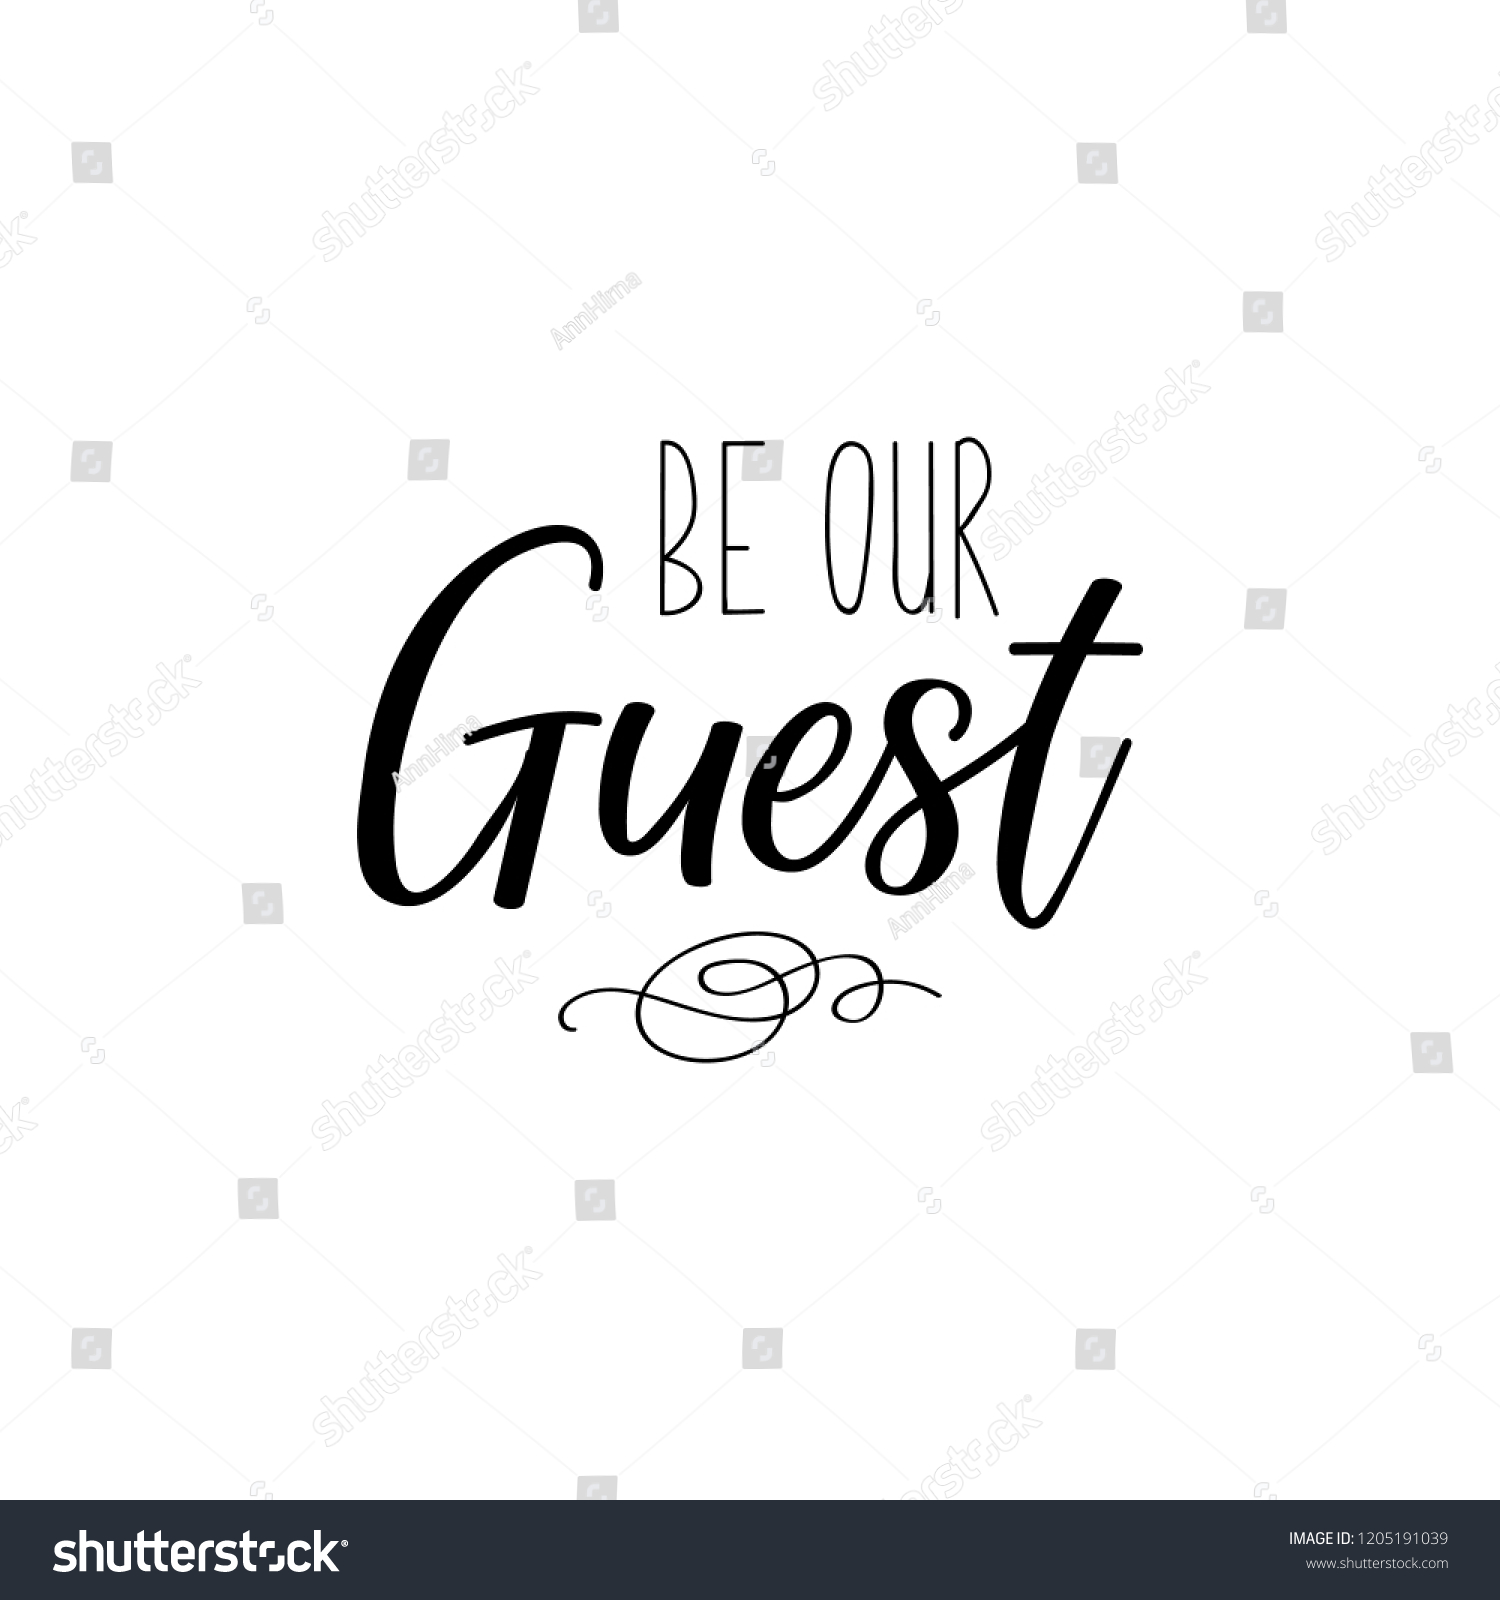 SVG of Be our guest. Lettering. Inspirational and funny quotes. Can be used for prints bags, t-shirts, home decor, posters, cards. svg